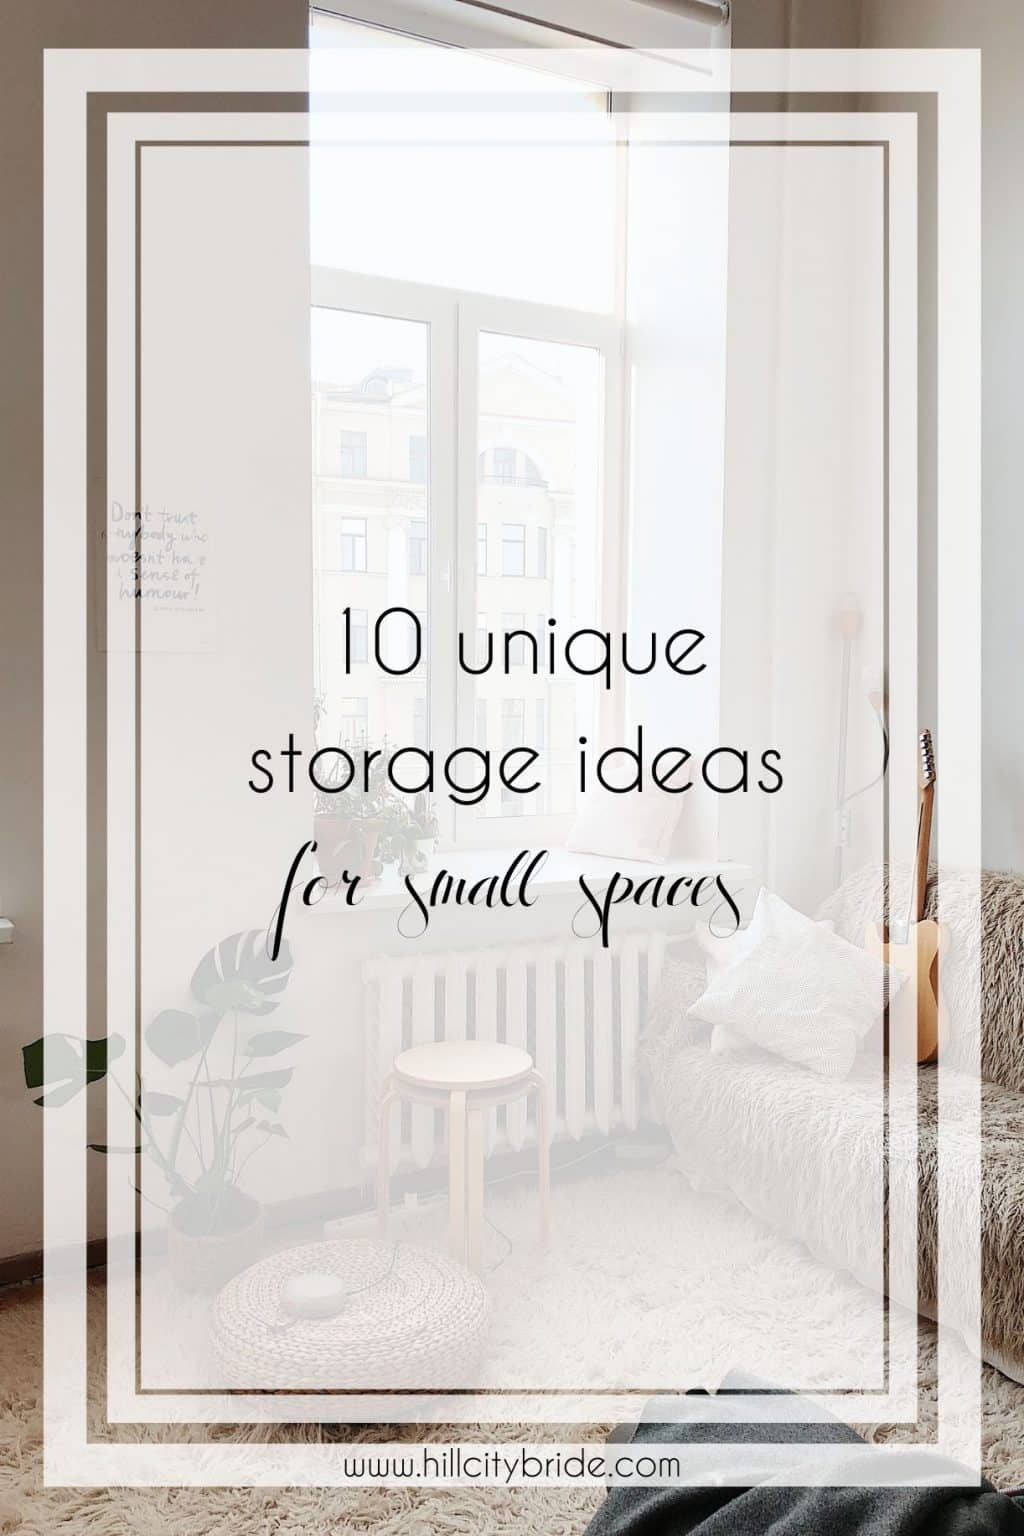 Think big with these 10 storage ideas for small spaces